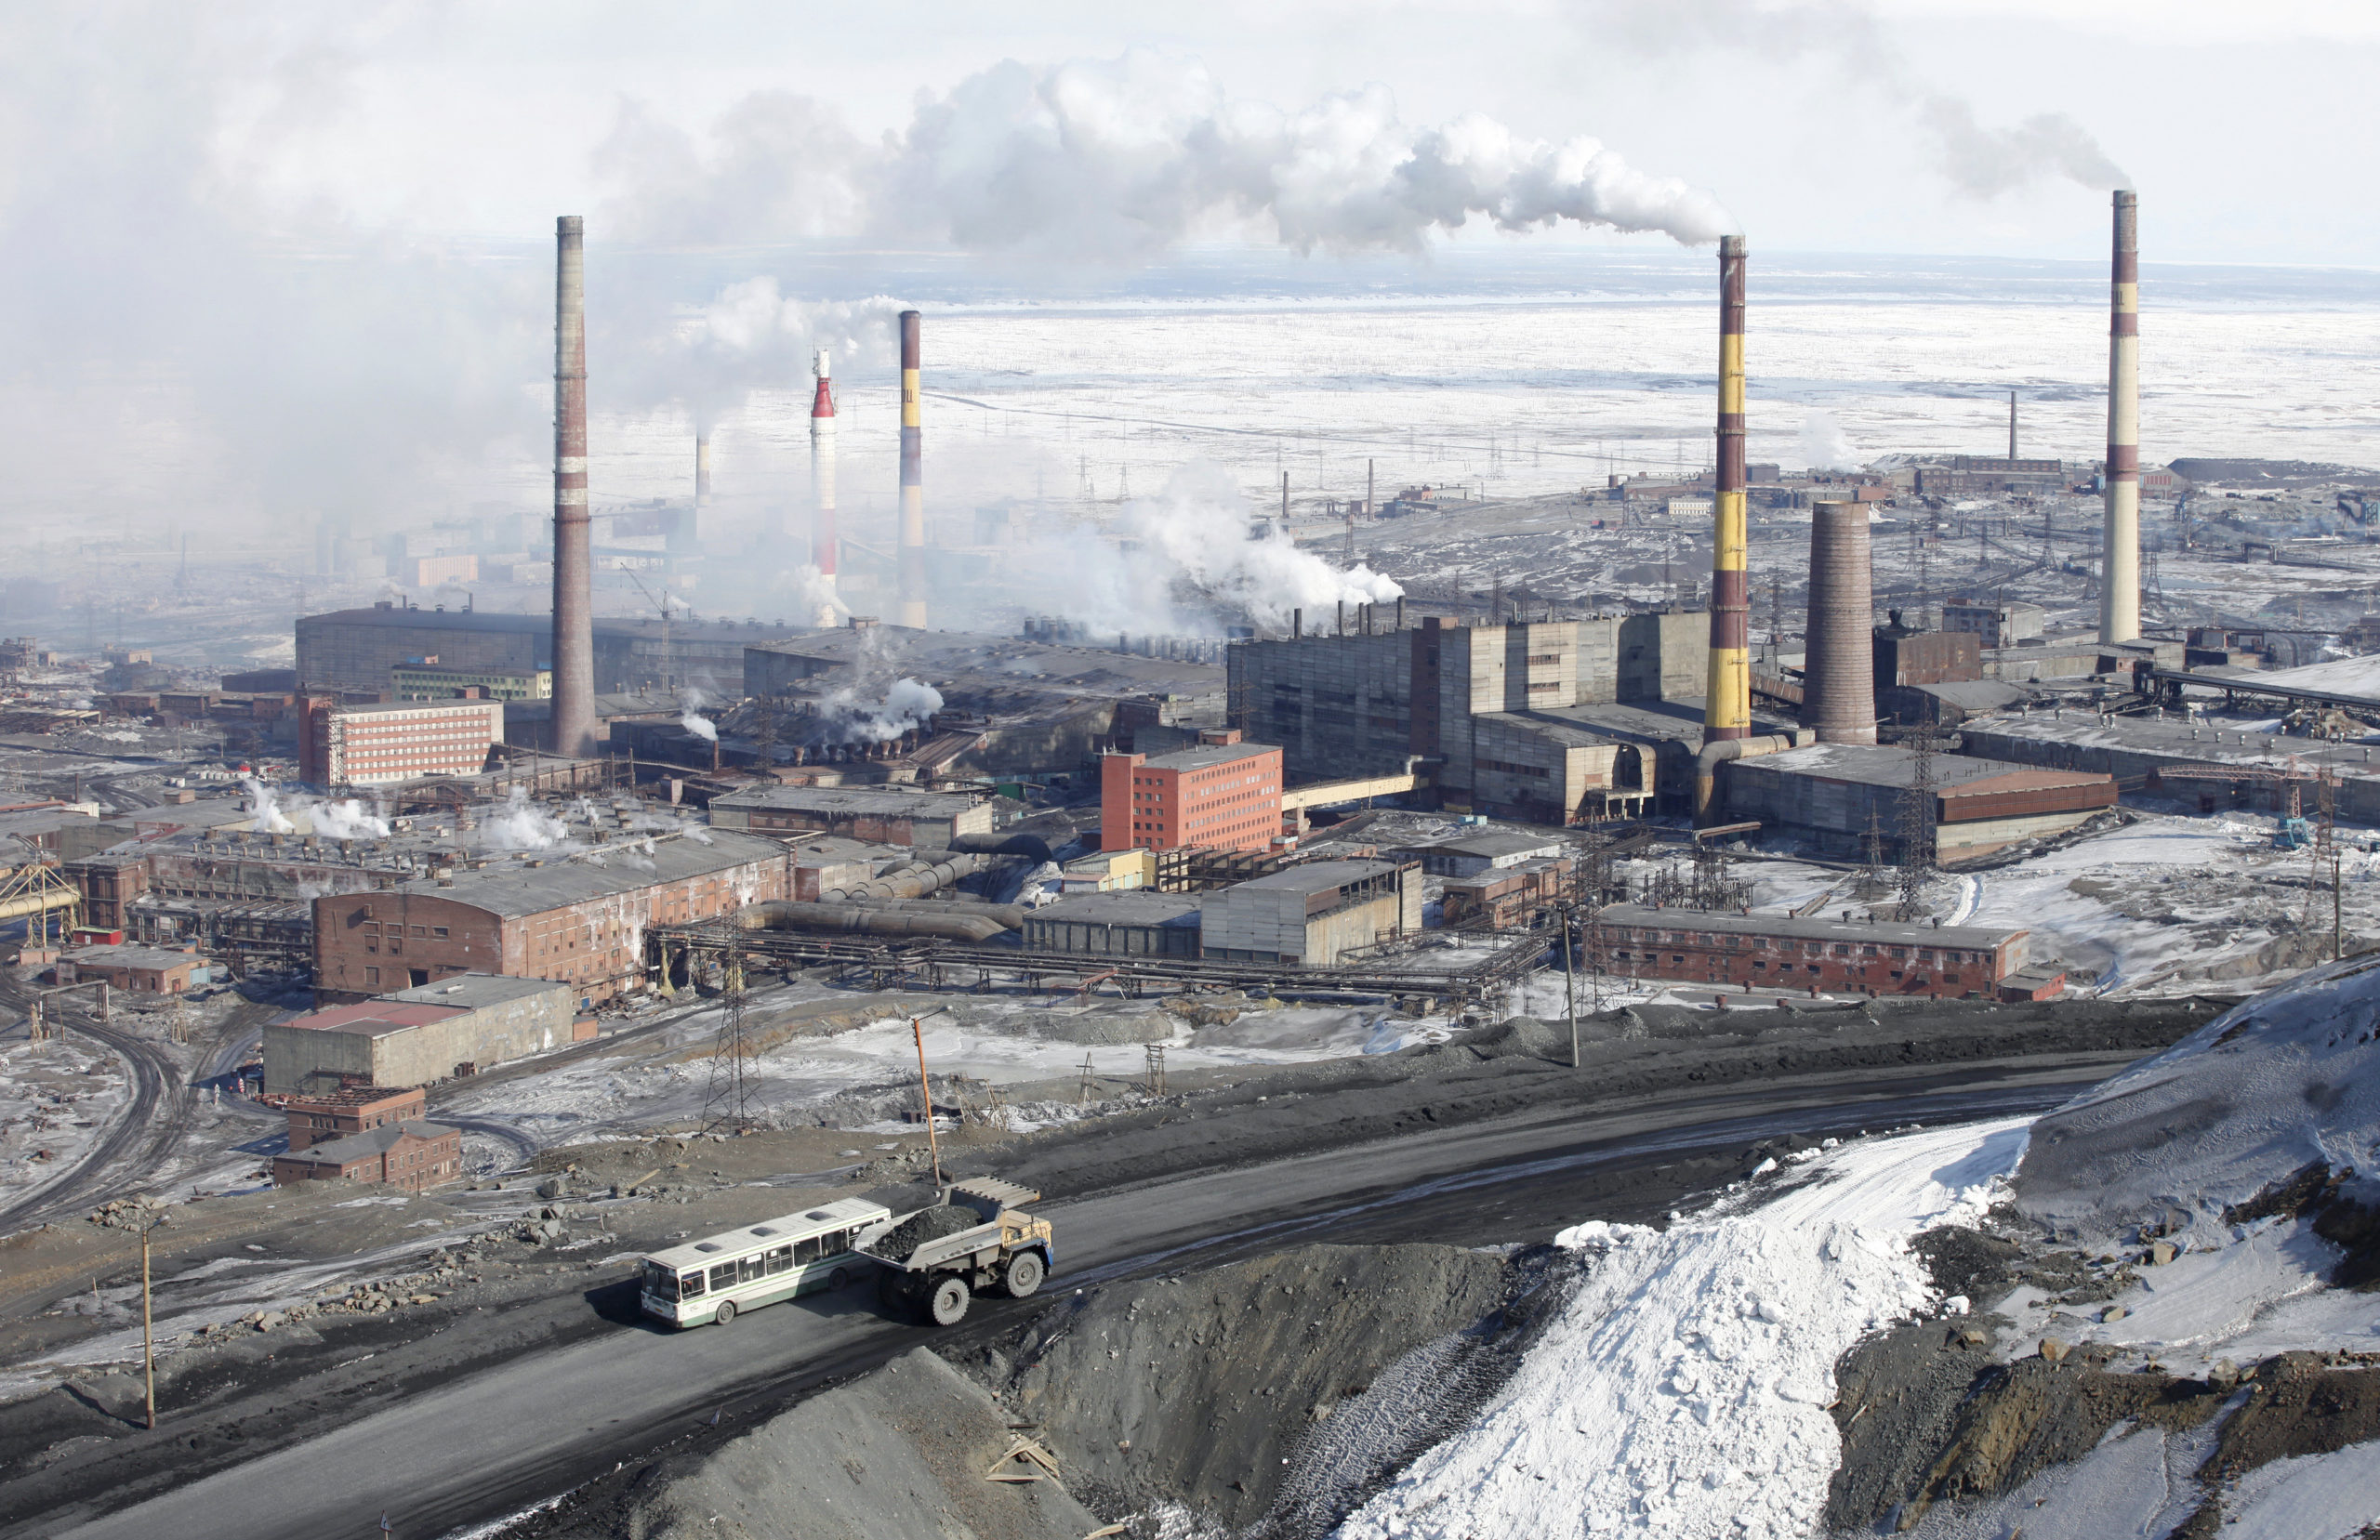 A general view is seen of Norilsk Nickel's nickel plant in Russia's Arctic city of Norilsk, April 16, 2010. More than a quarter of the 210,000 people living in and around the city work for Norilsk Nikel, a $38 billion company mining a fifth of the world's nickel and more than half of its palladium, a metal used in car exhausts and jewellery.